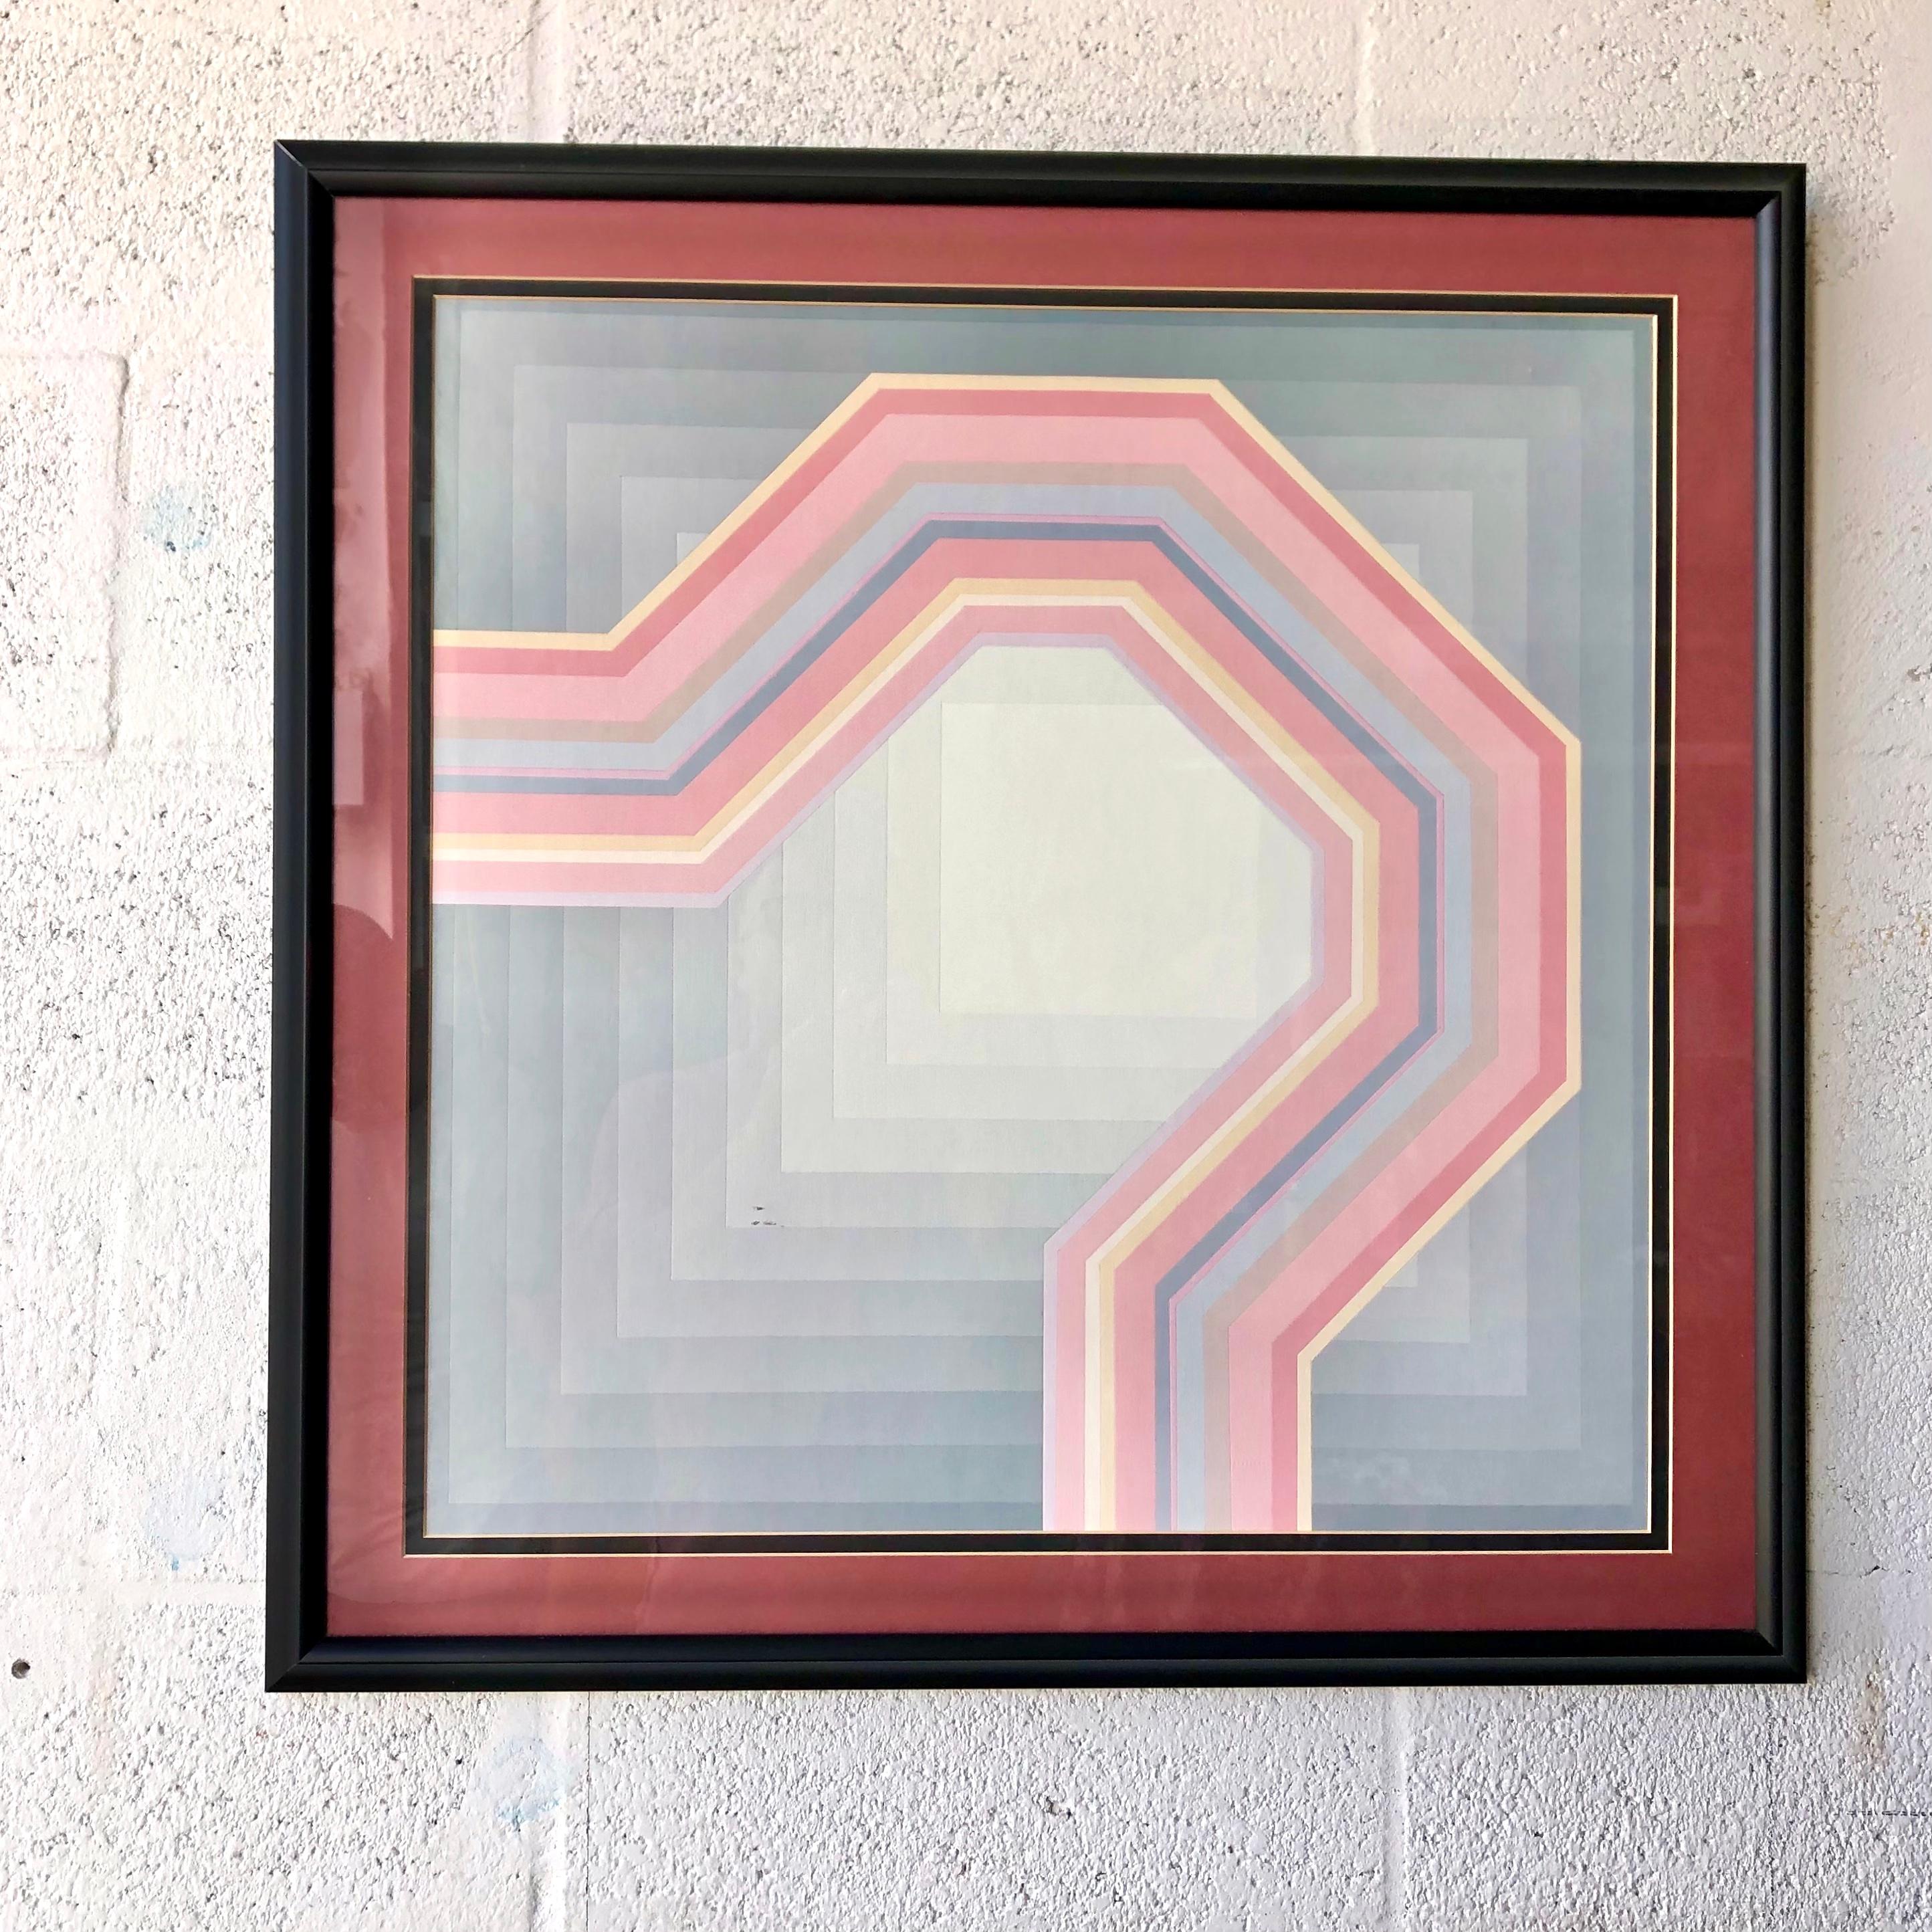 American Framed Geometric Op Art Lithograph in the Richard Anuszkiewicz's Style. C 1980s For Sale